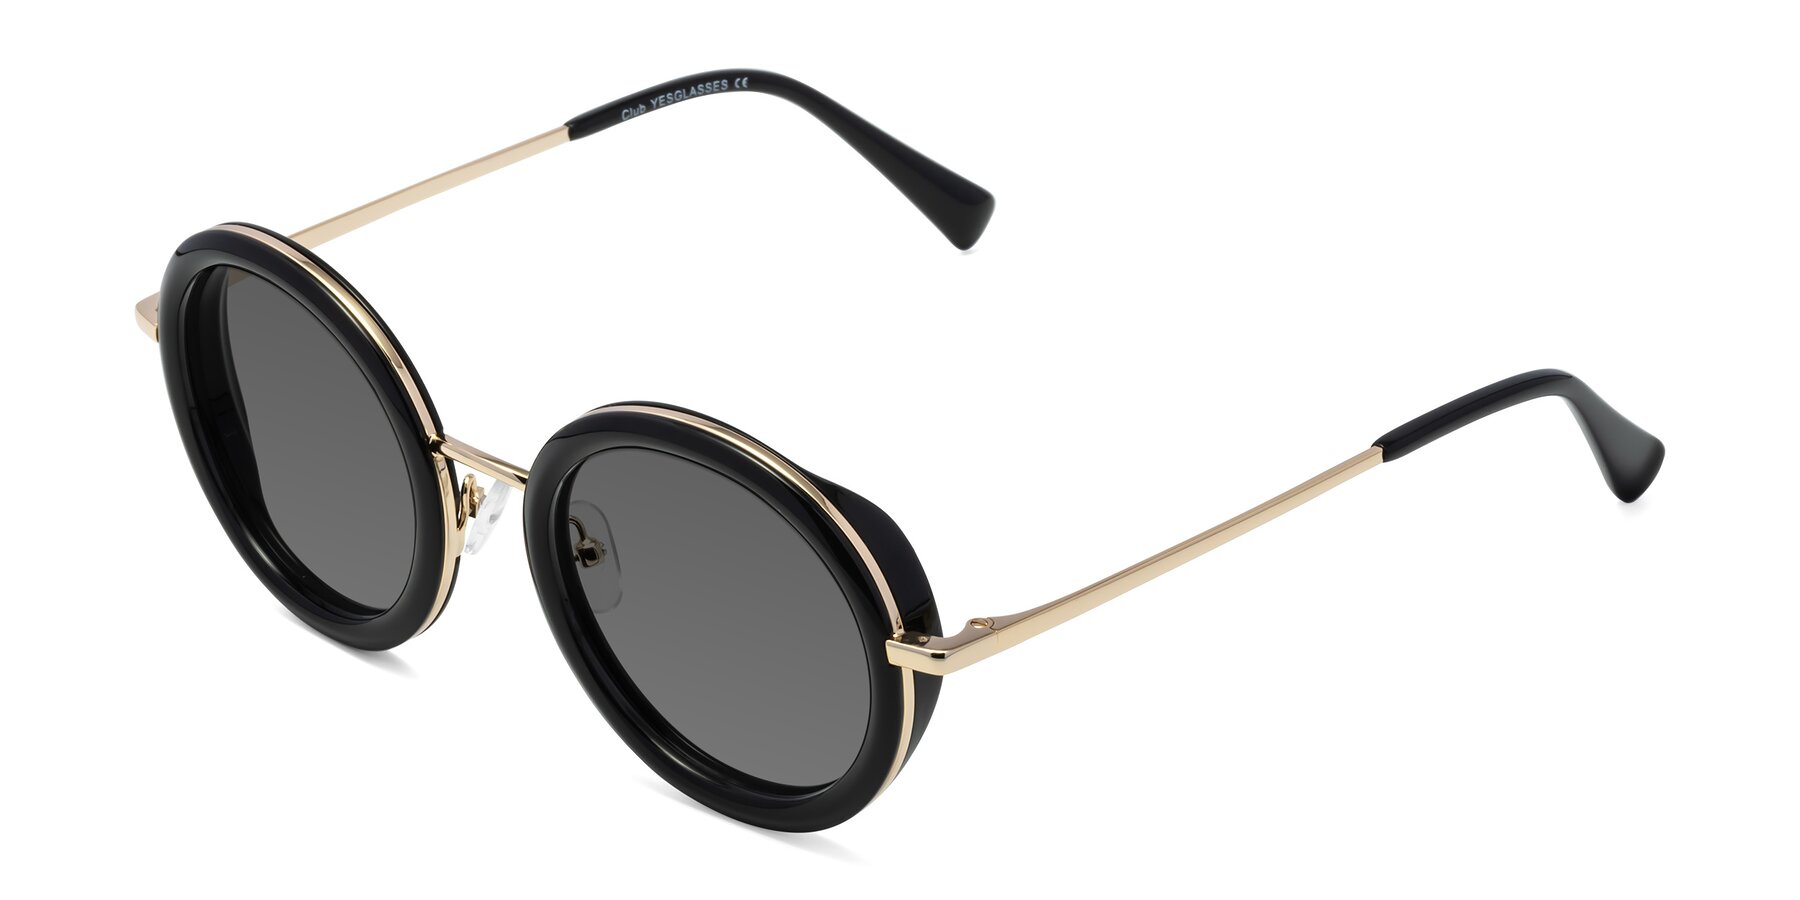 Angle of Club in Black-Gold with Medium Gray Tinted Lenses